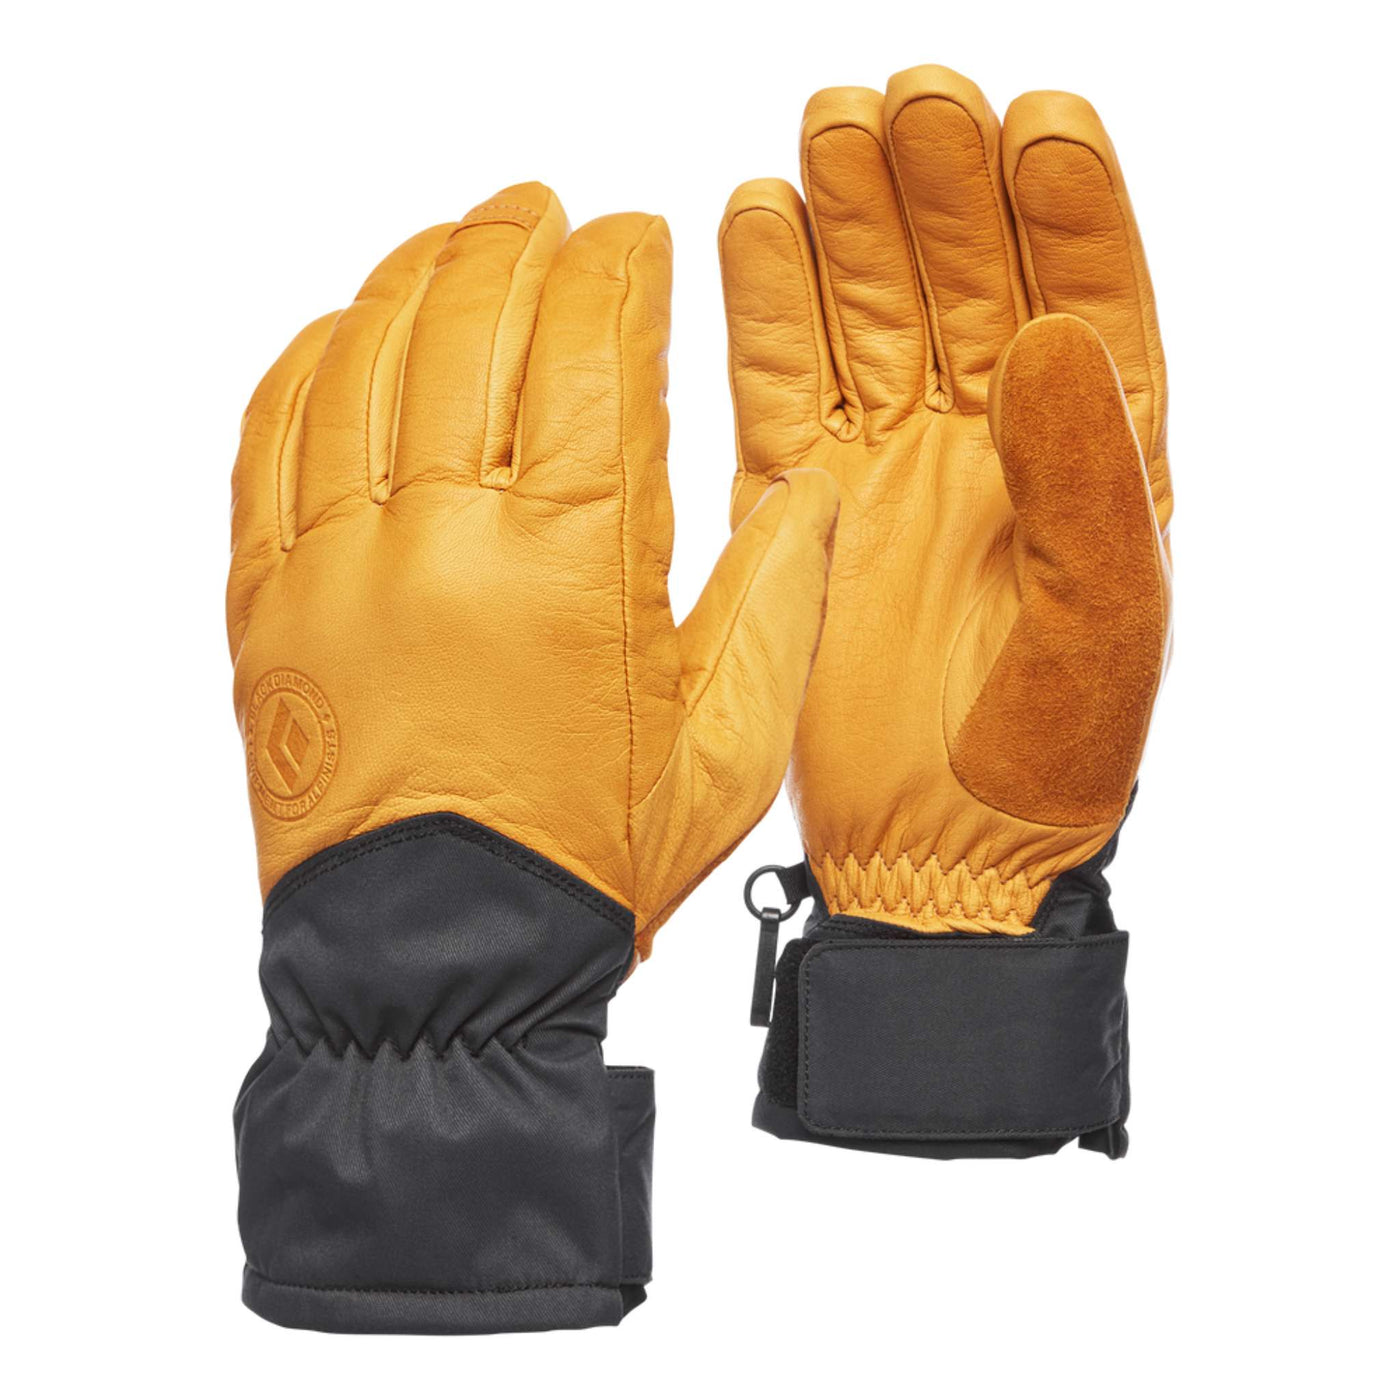 Black Diamond Tour Gloves | Backcountry Leather Gloves NZ | Black COuntry NZ | Further Faster Christchurch NZ #natural